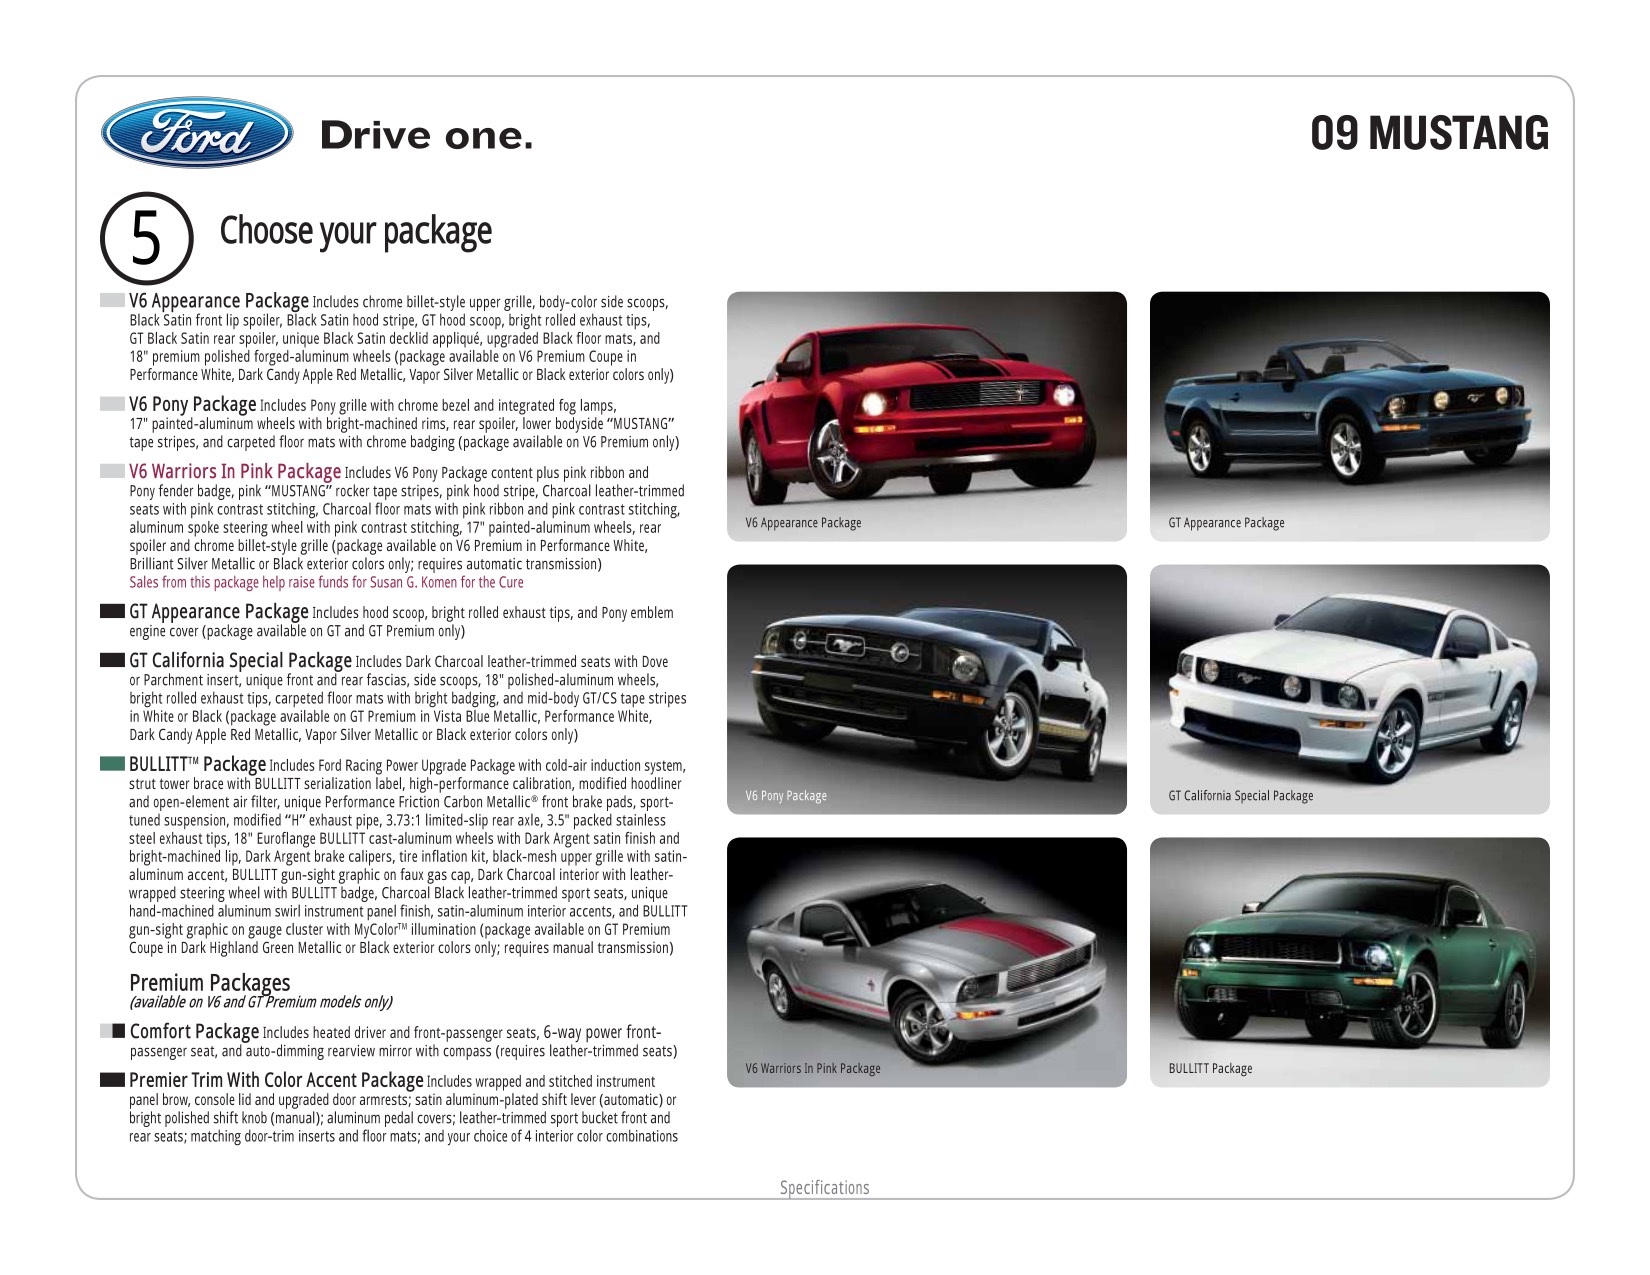 2009 Ford Mustang Brochure Page 1